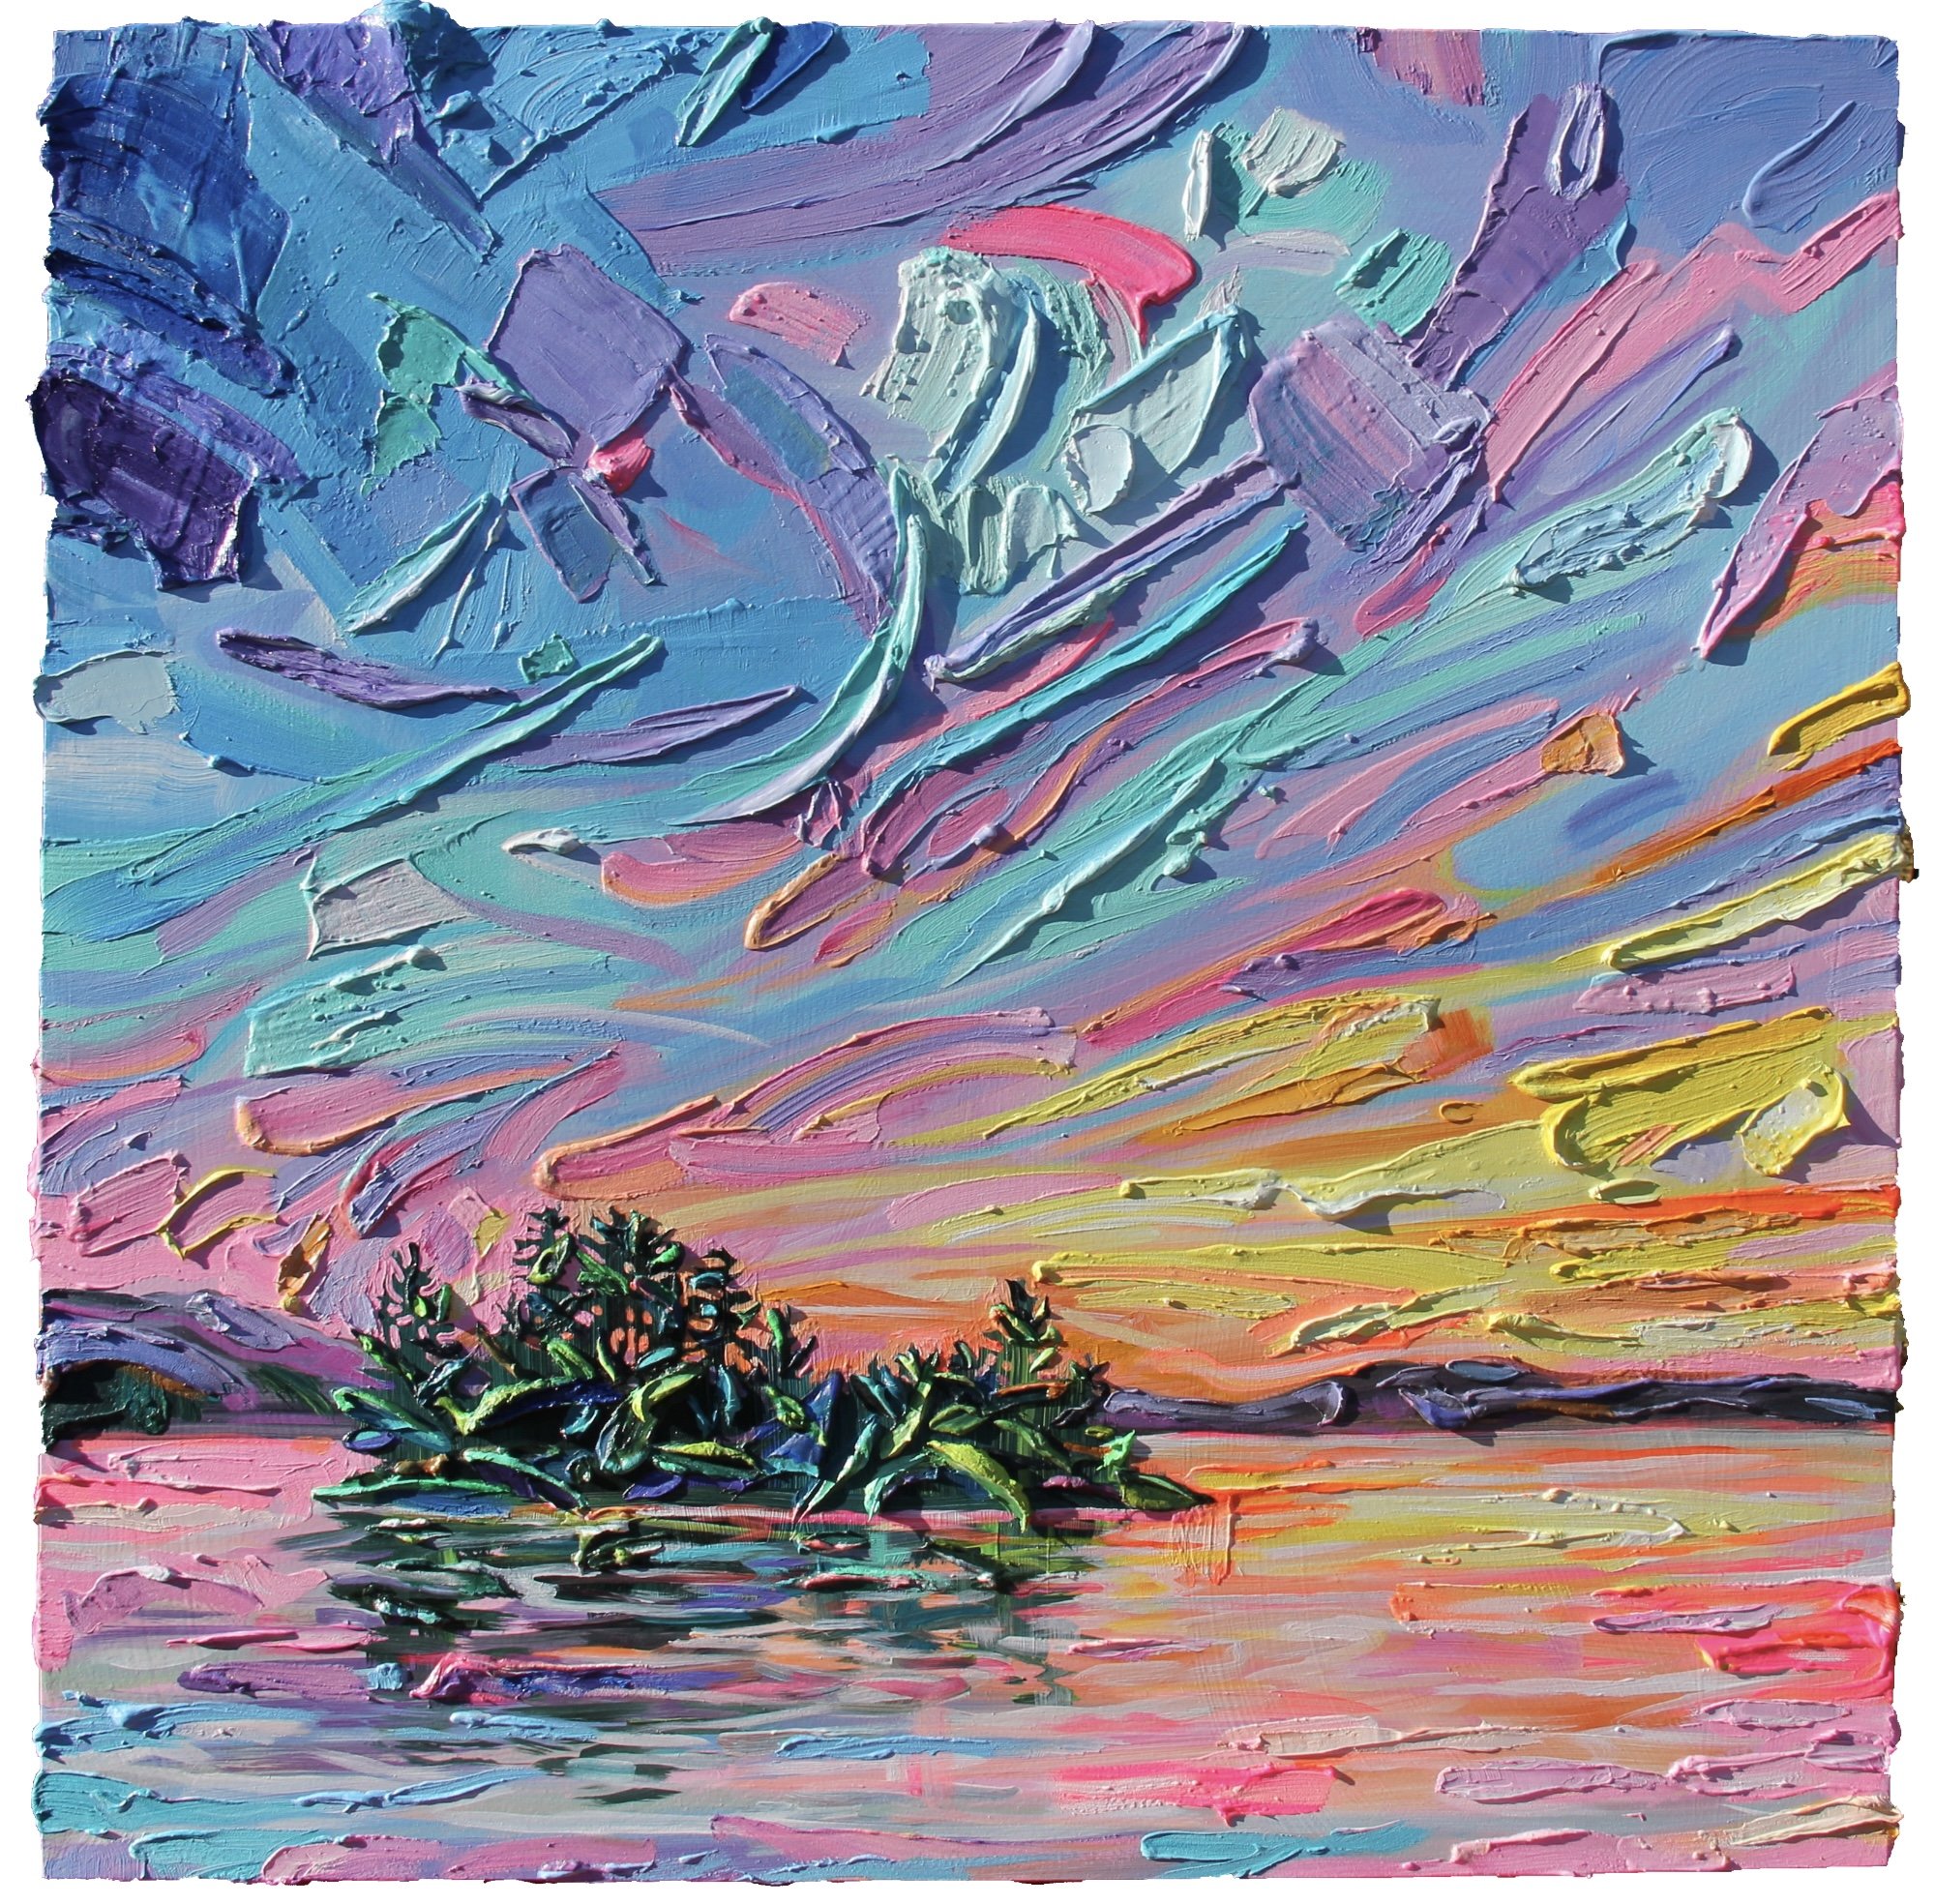 Sunkissed Kennisis Lake, 30 x 30”, oil and acrylic on panel, 2022.